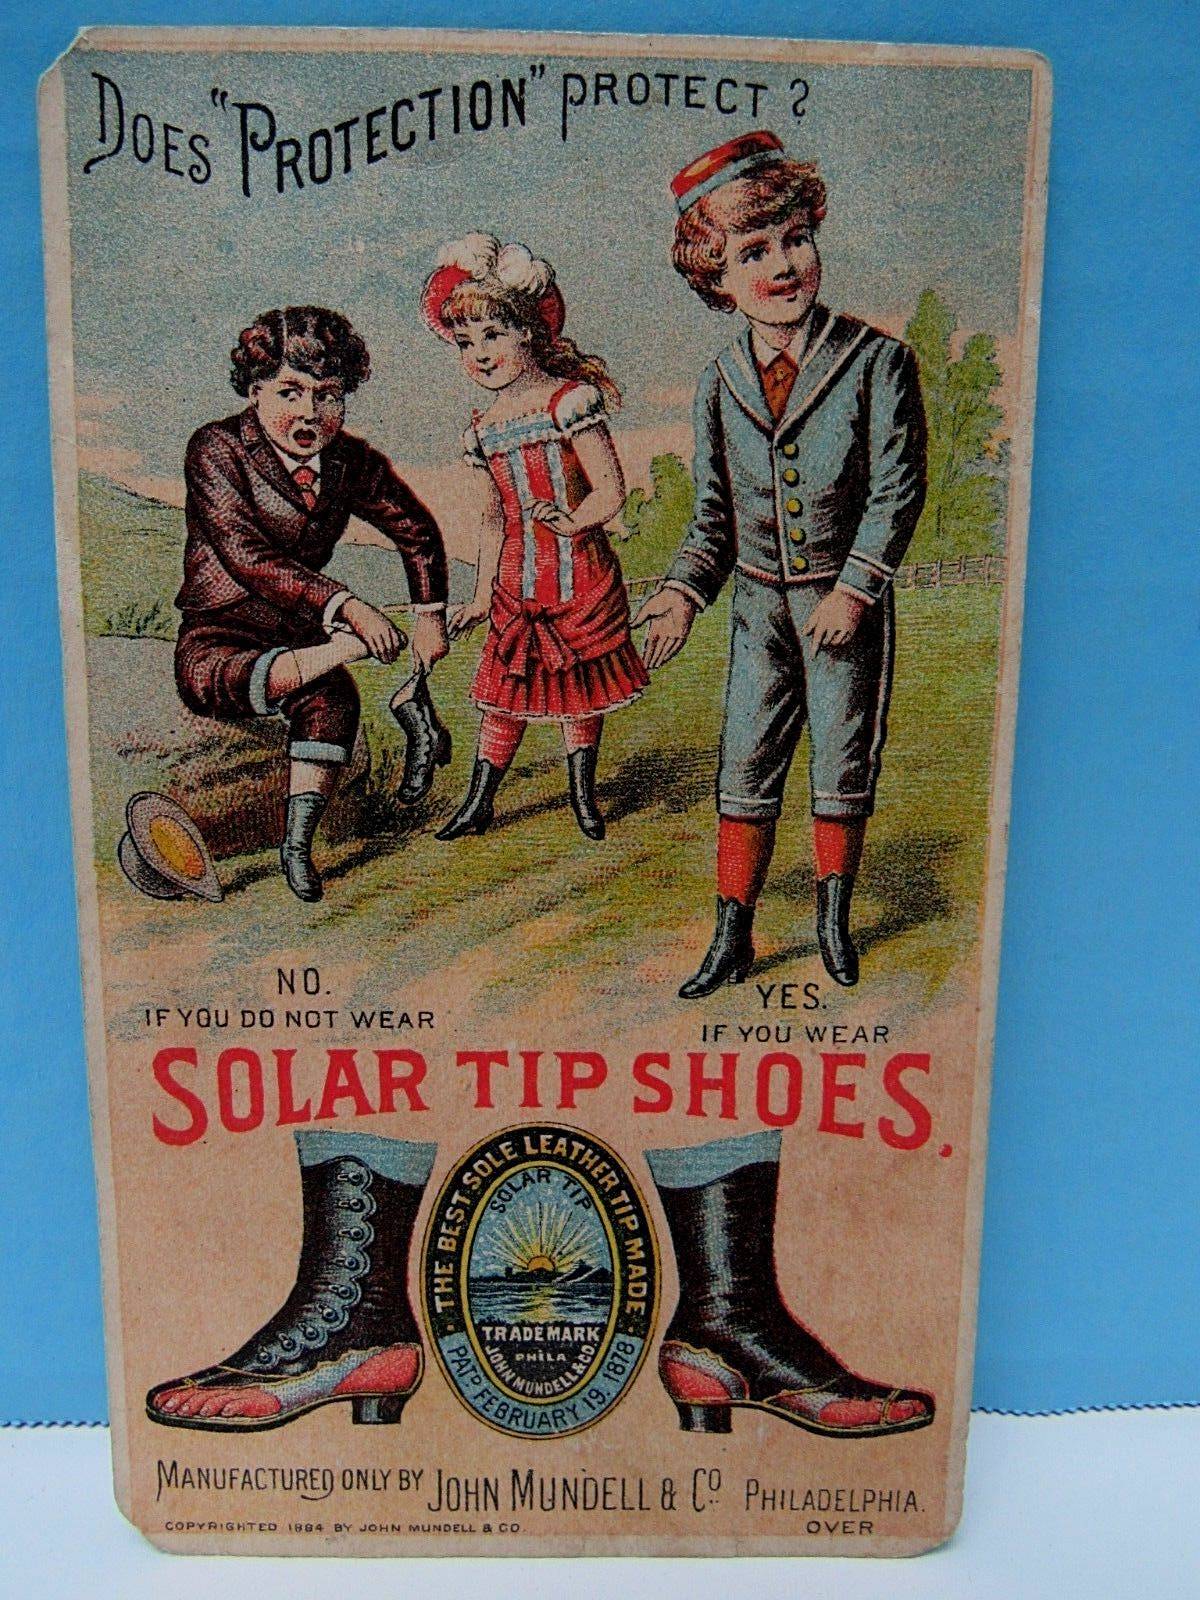 VINTAGE ANTIQUE 1884 COLORFUL ADVERTISING TRADE CARD FOR SOLAR TIP SHOES VG COND